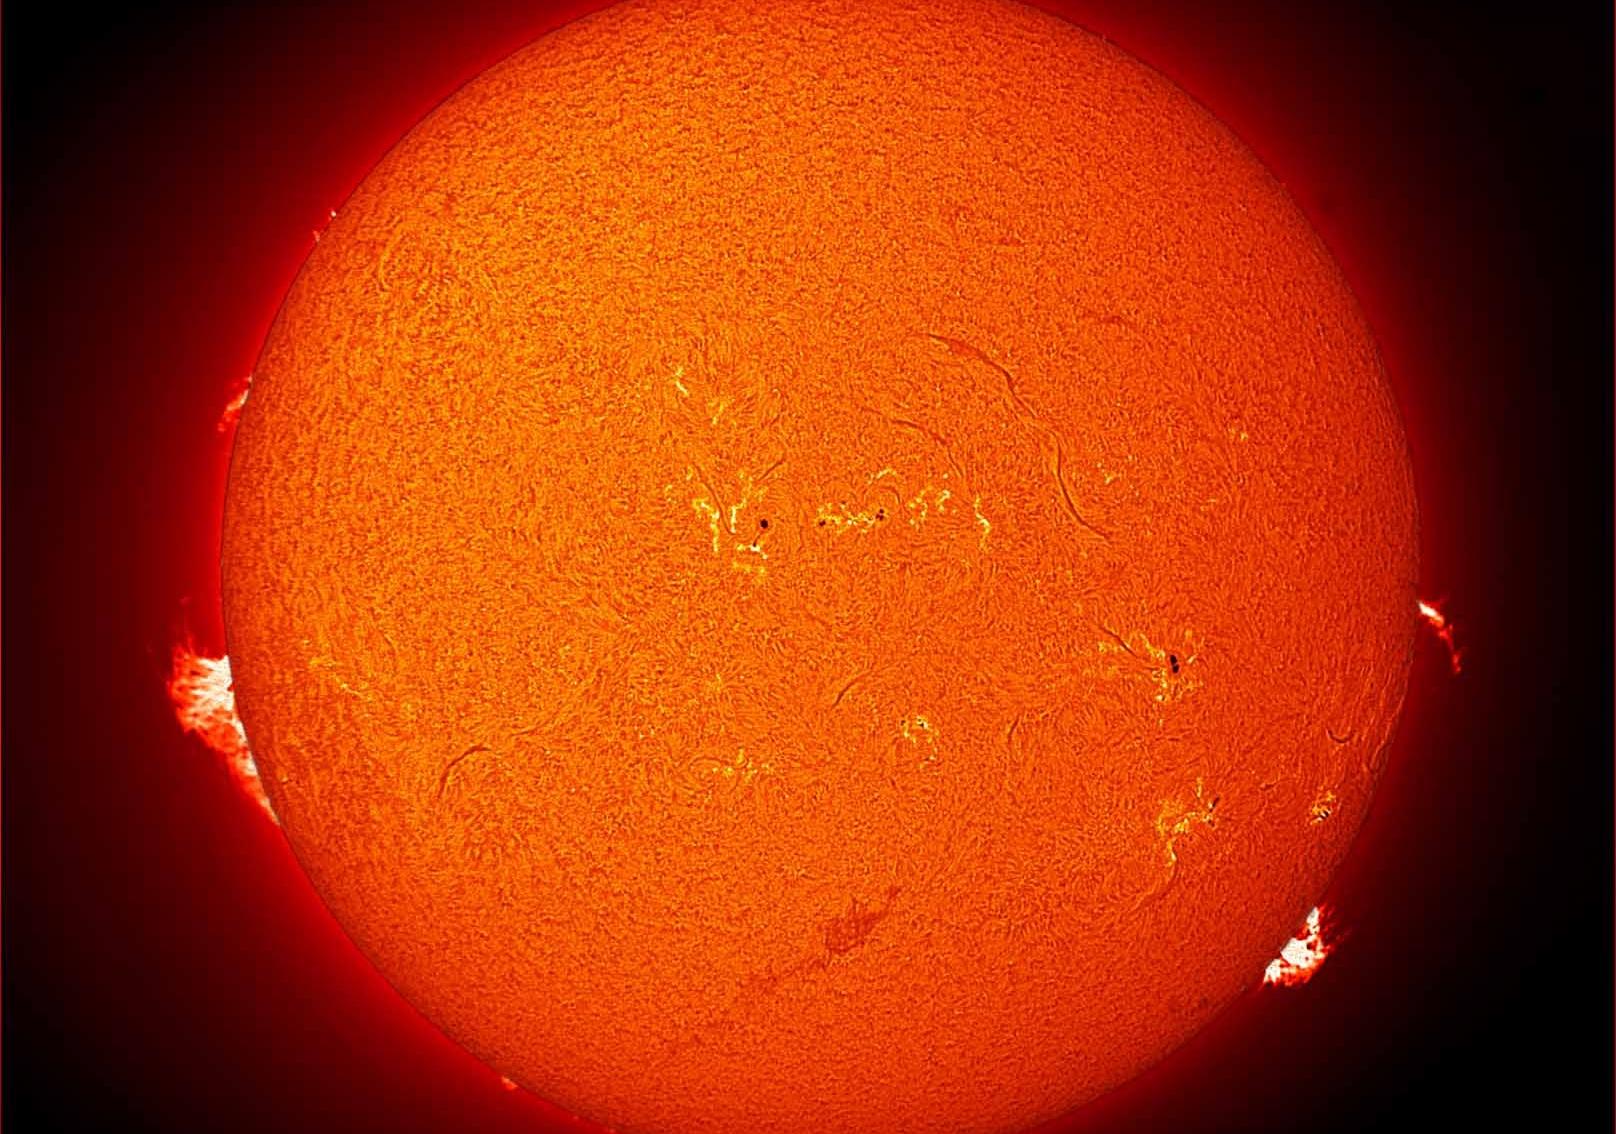 Image of the Sun from the SCSM observatory, with features labeled.